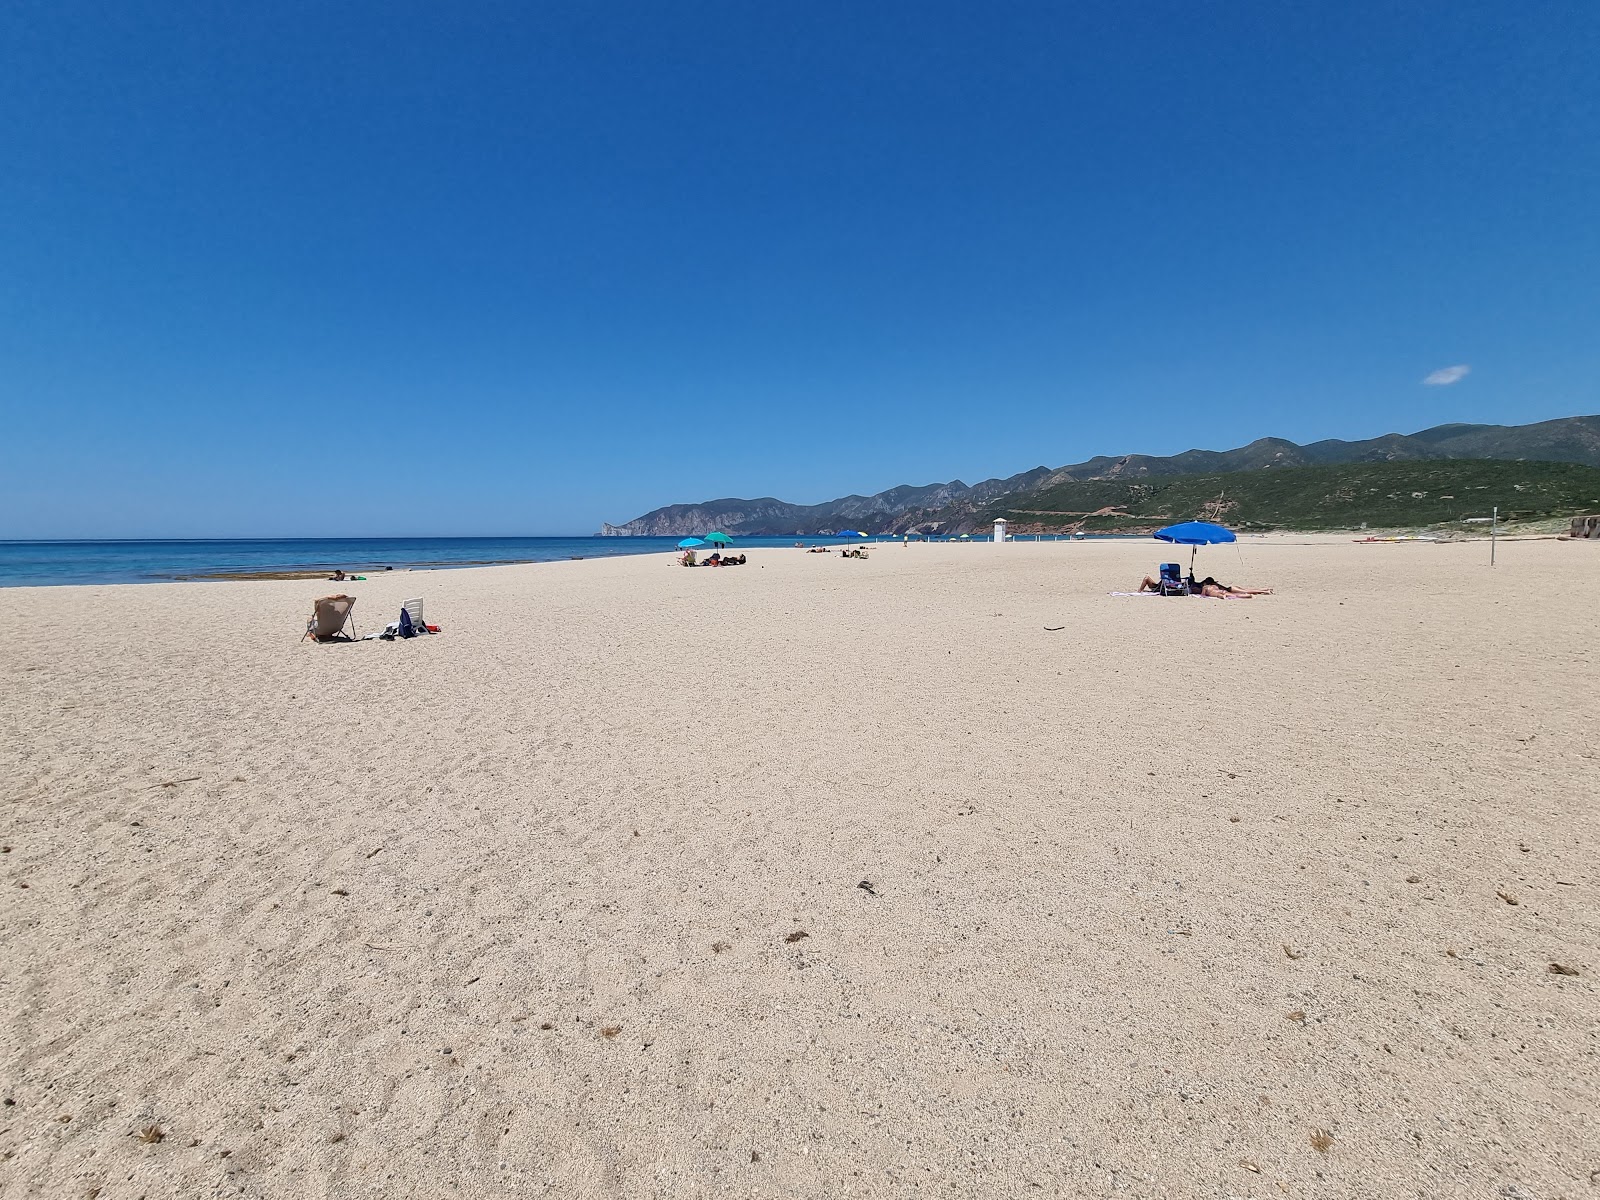 Photo of Spiaggia di Plagemesu - popular place among relax connoisseurs